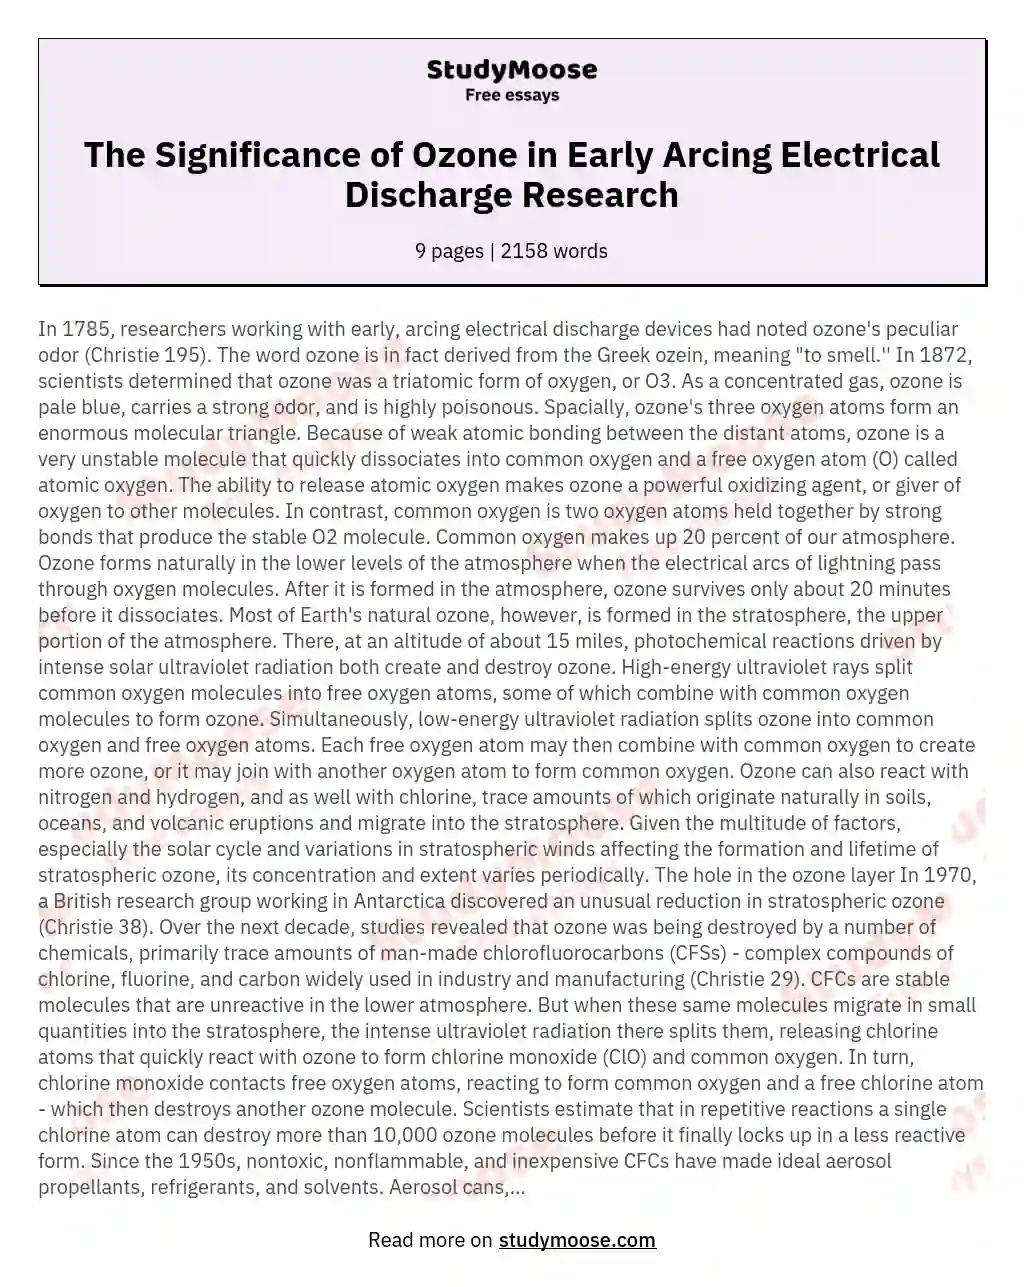 The Significance of Ozone in Early Arcing Electrical Discharge Research essay